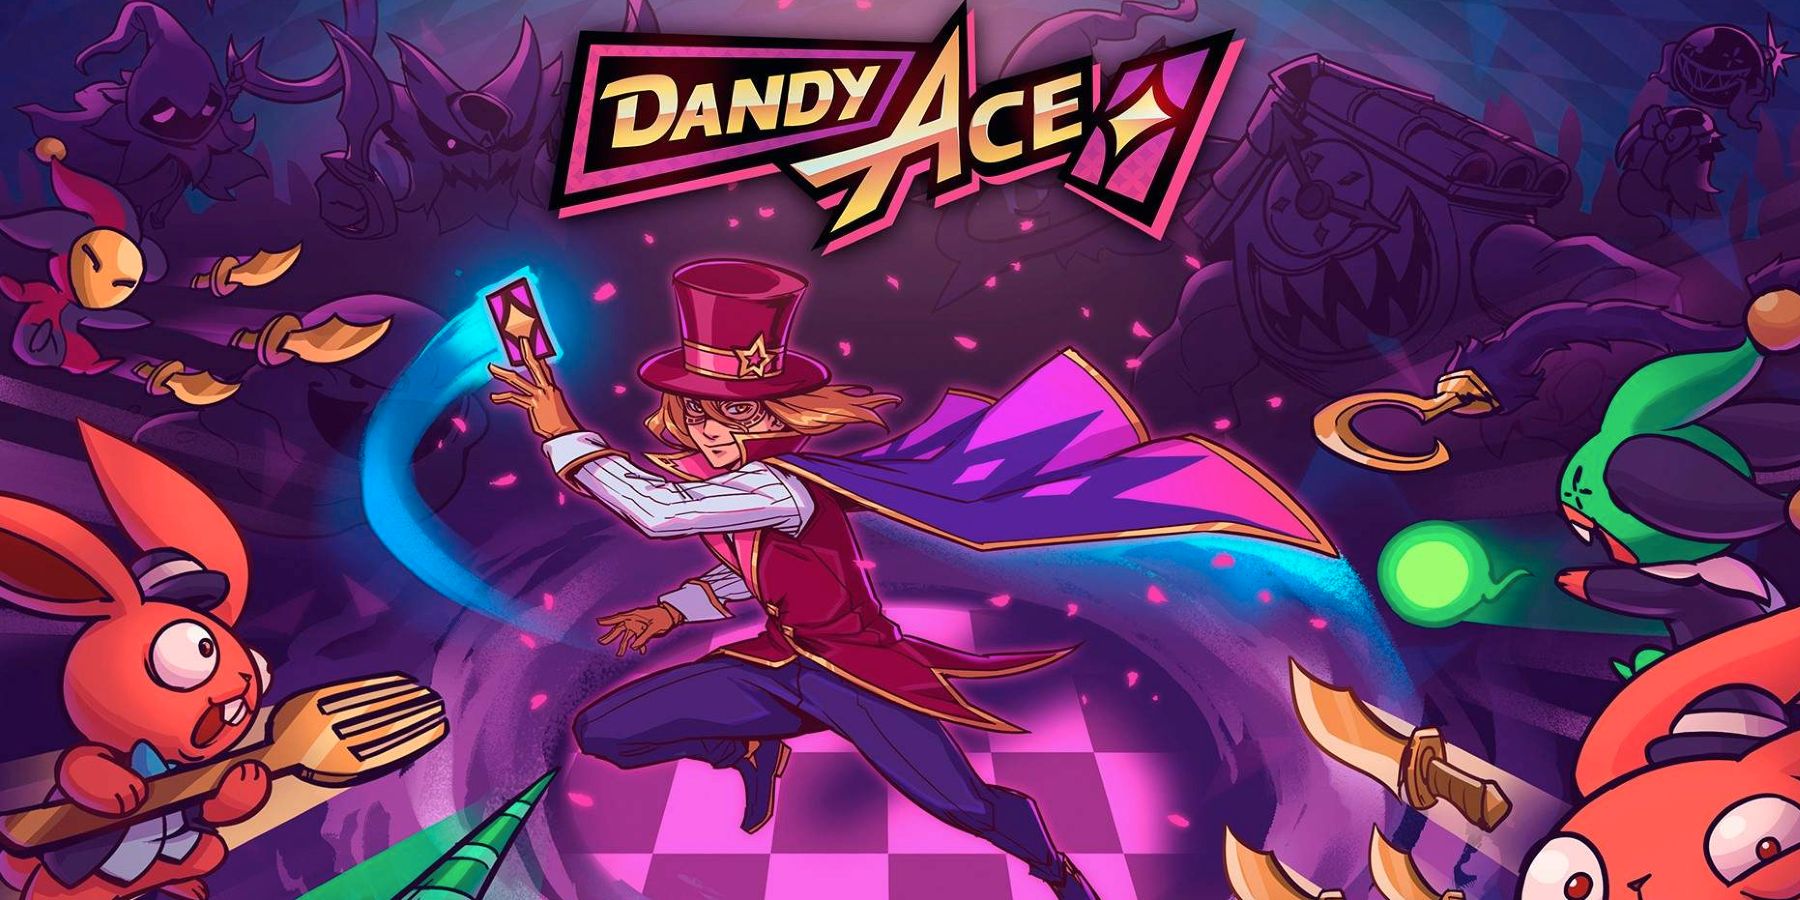 Xbox Game Pass Game Dandy Ace Explained